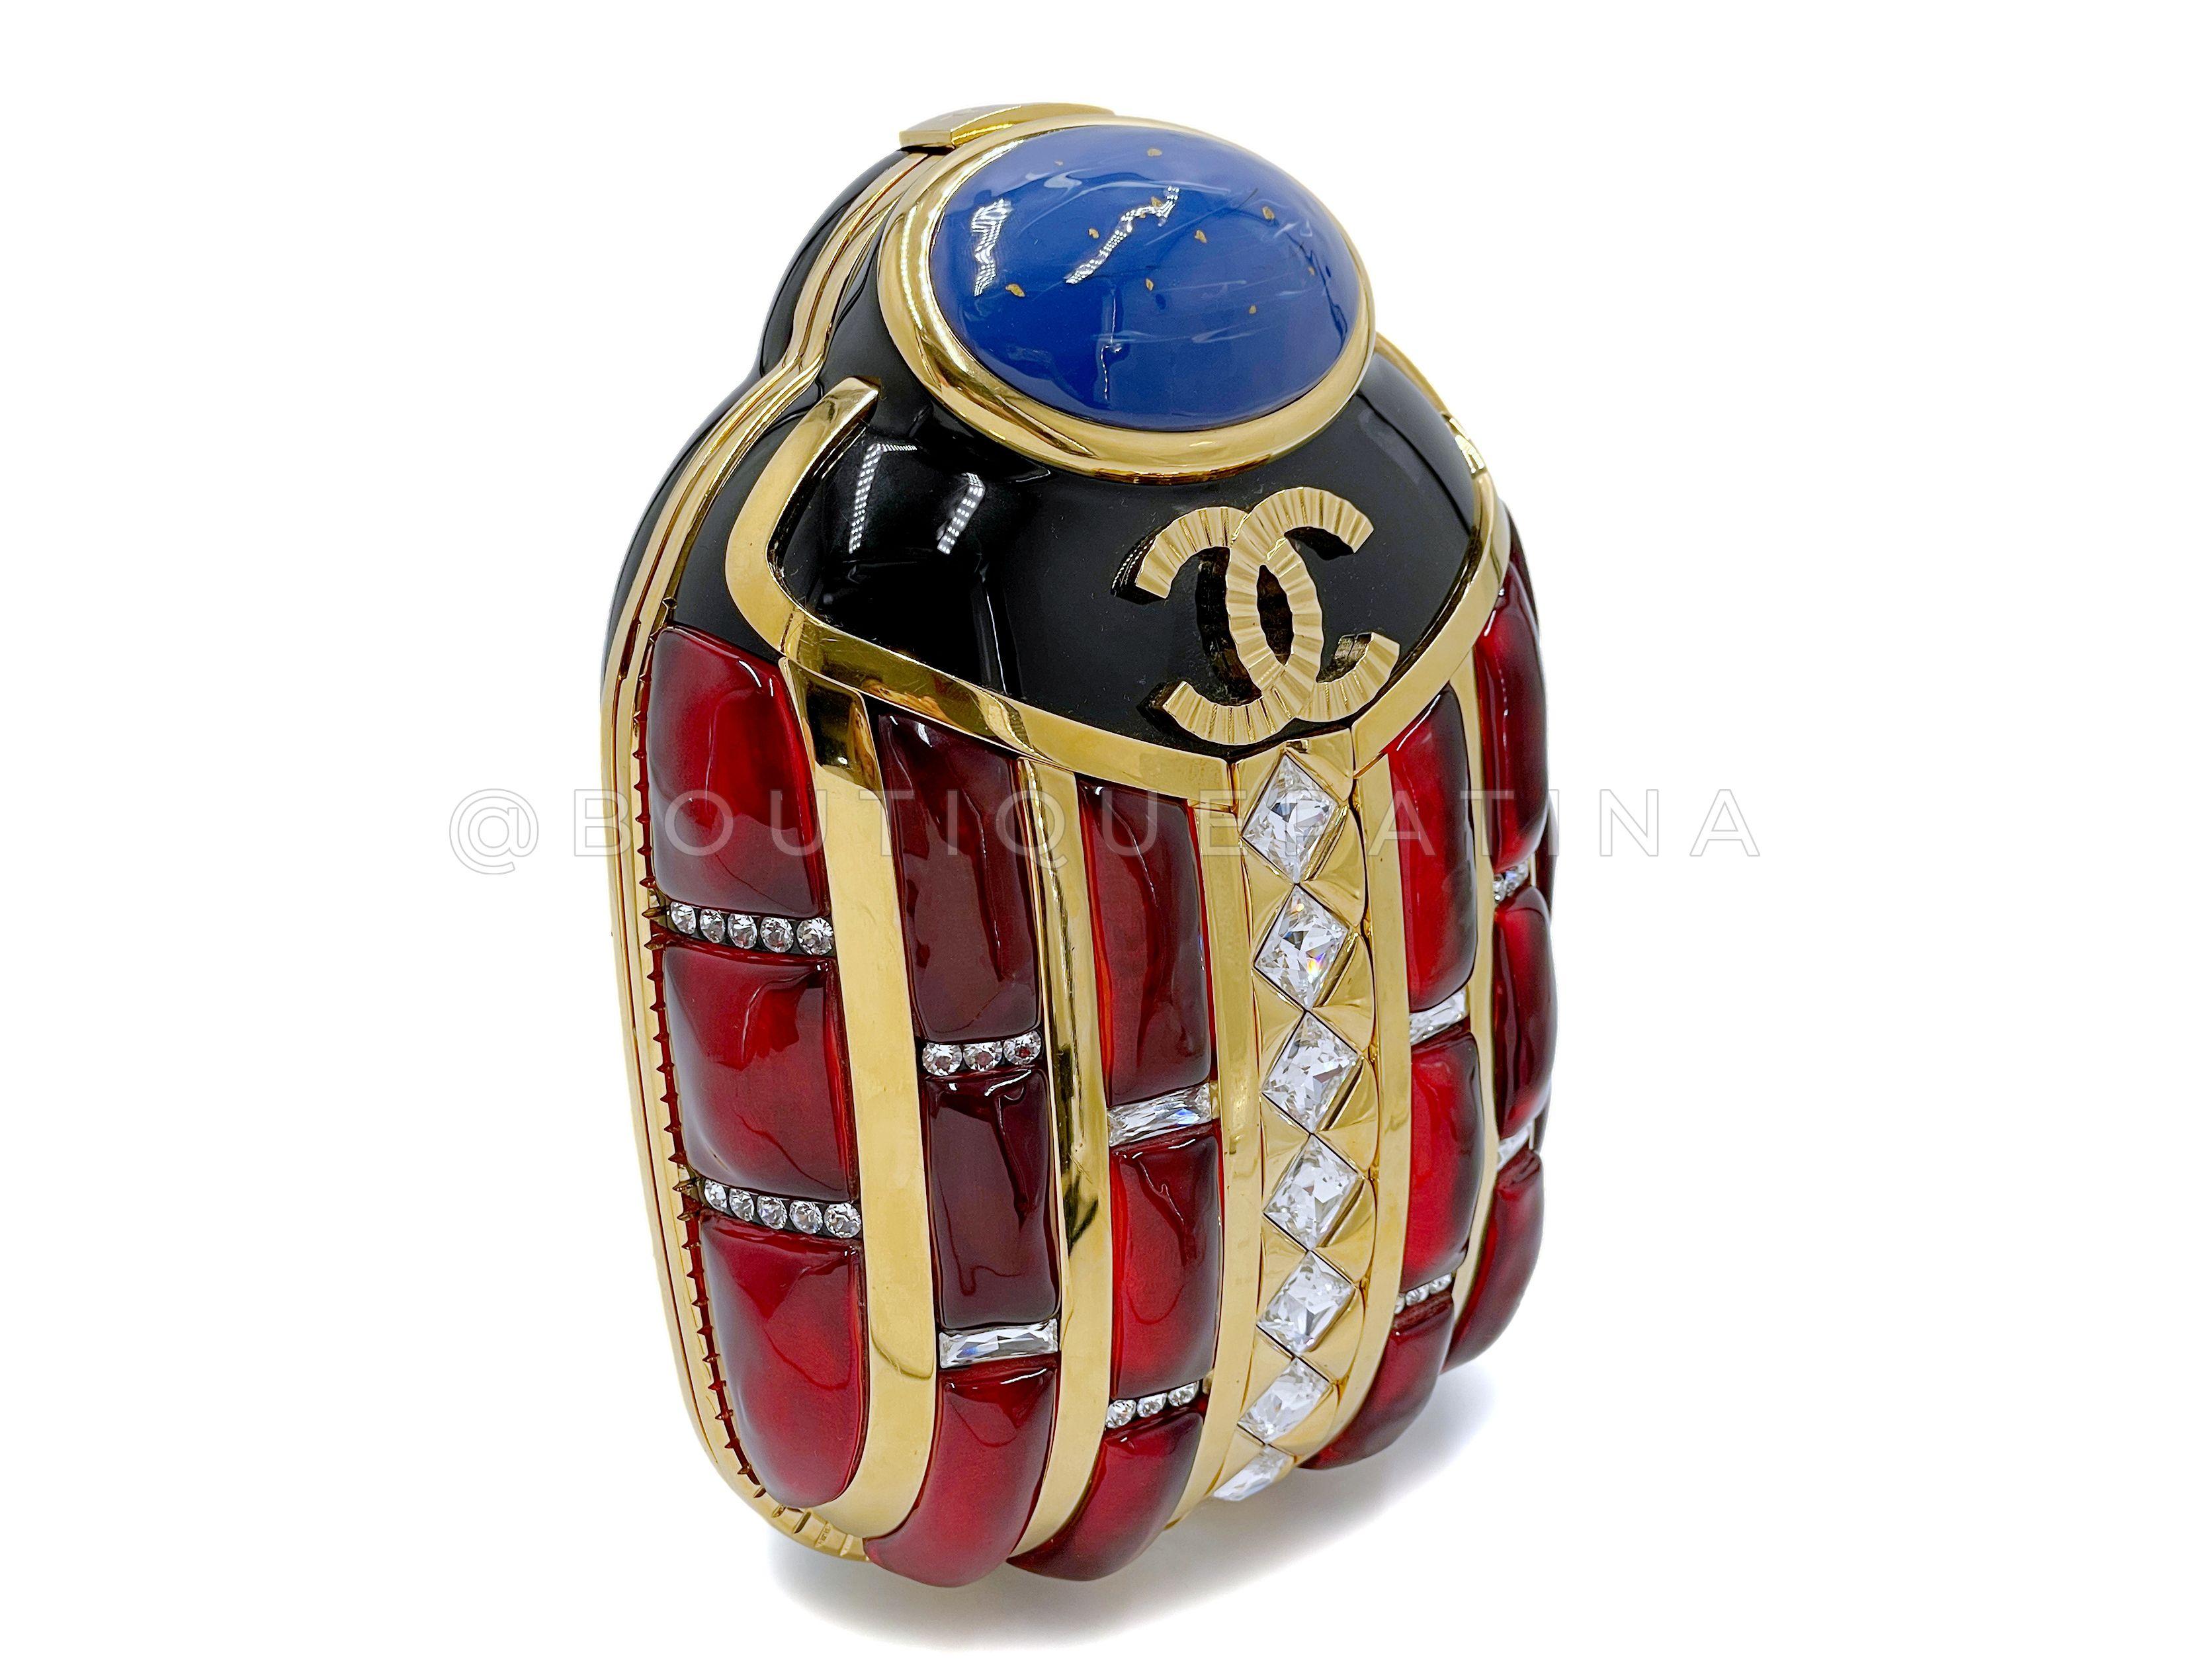 Chanel 2019 Egypt Paris-New York Scarab Minaudière Evening Clutch Bag 67377 In Excellent Condition For Sale In Costa Mesa, CA